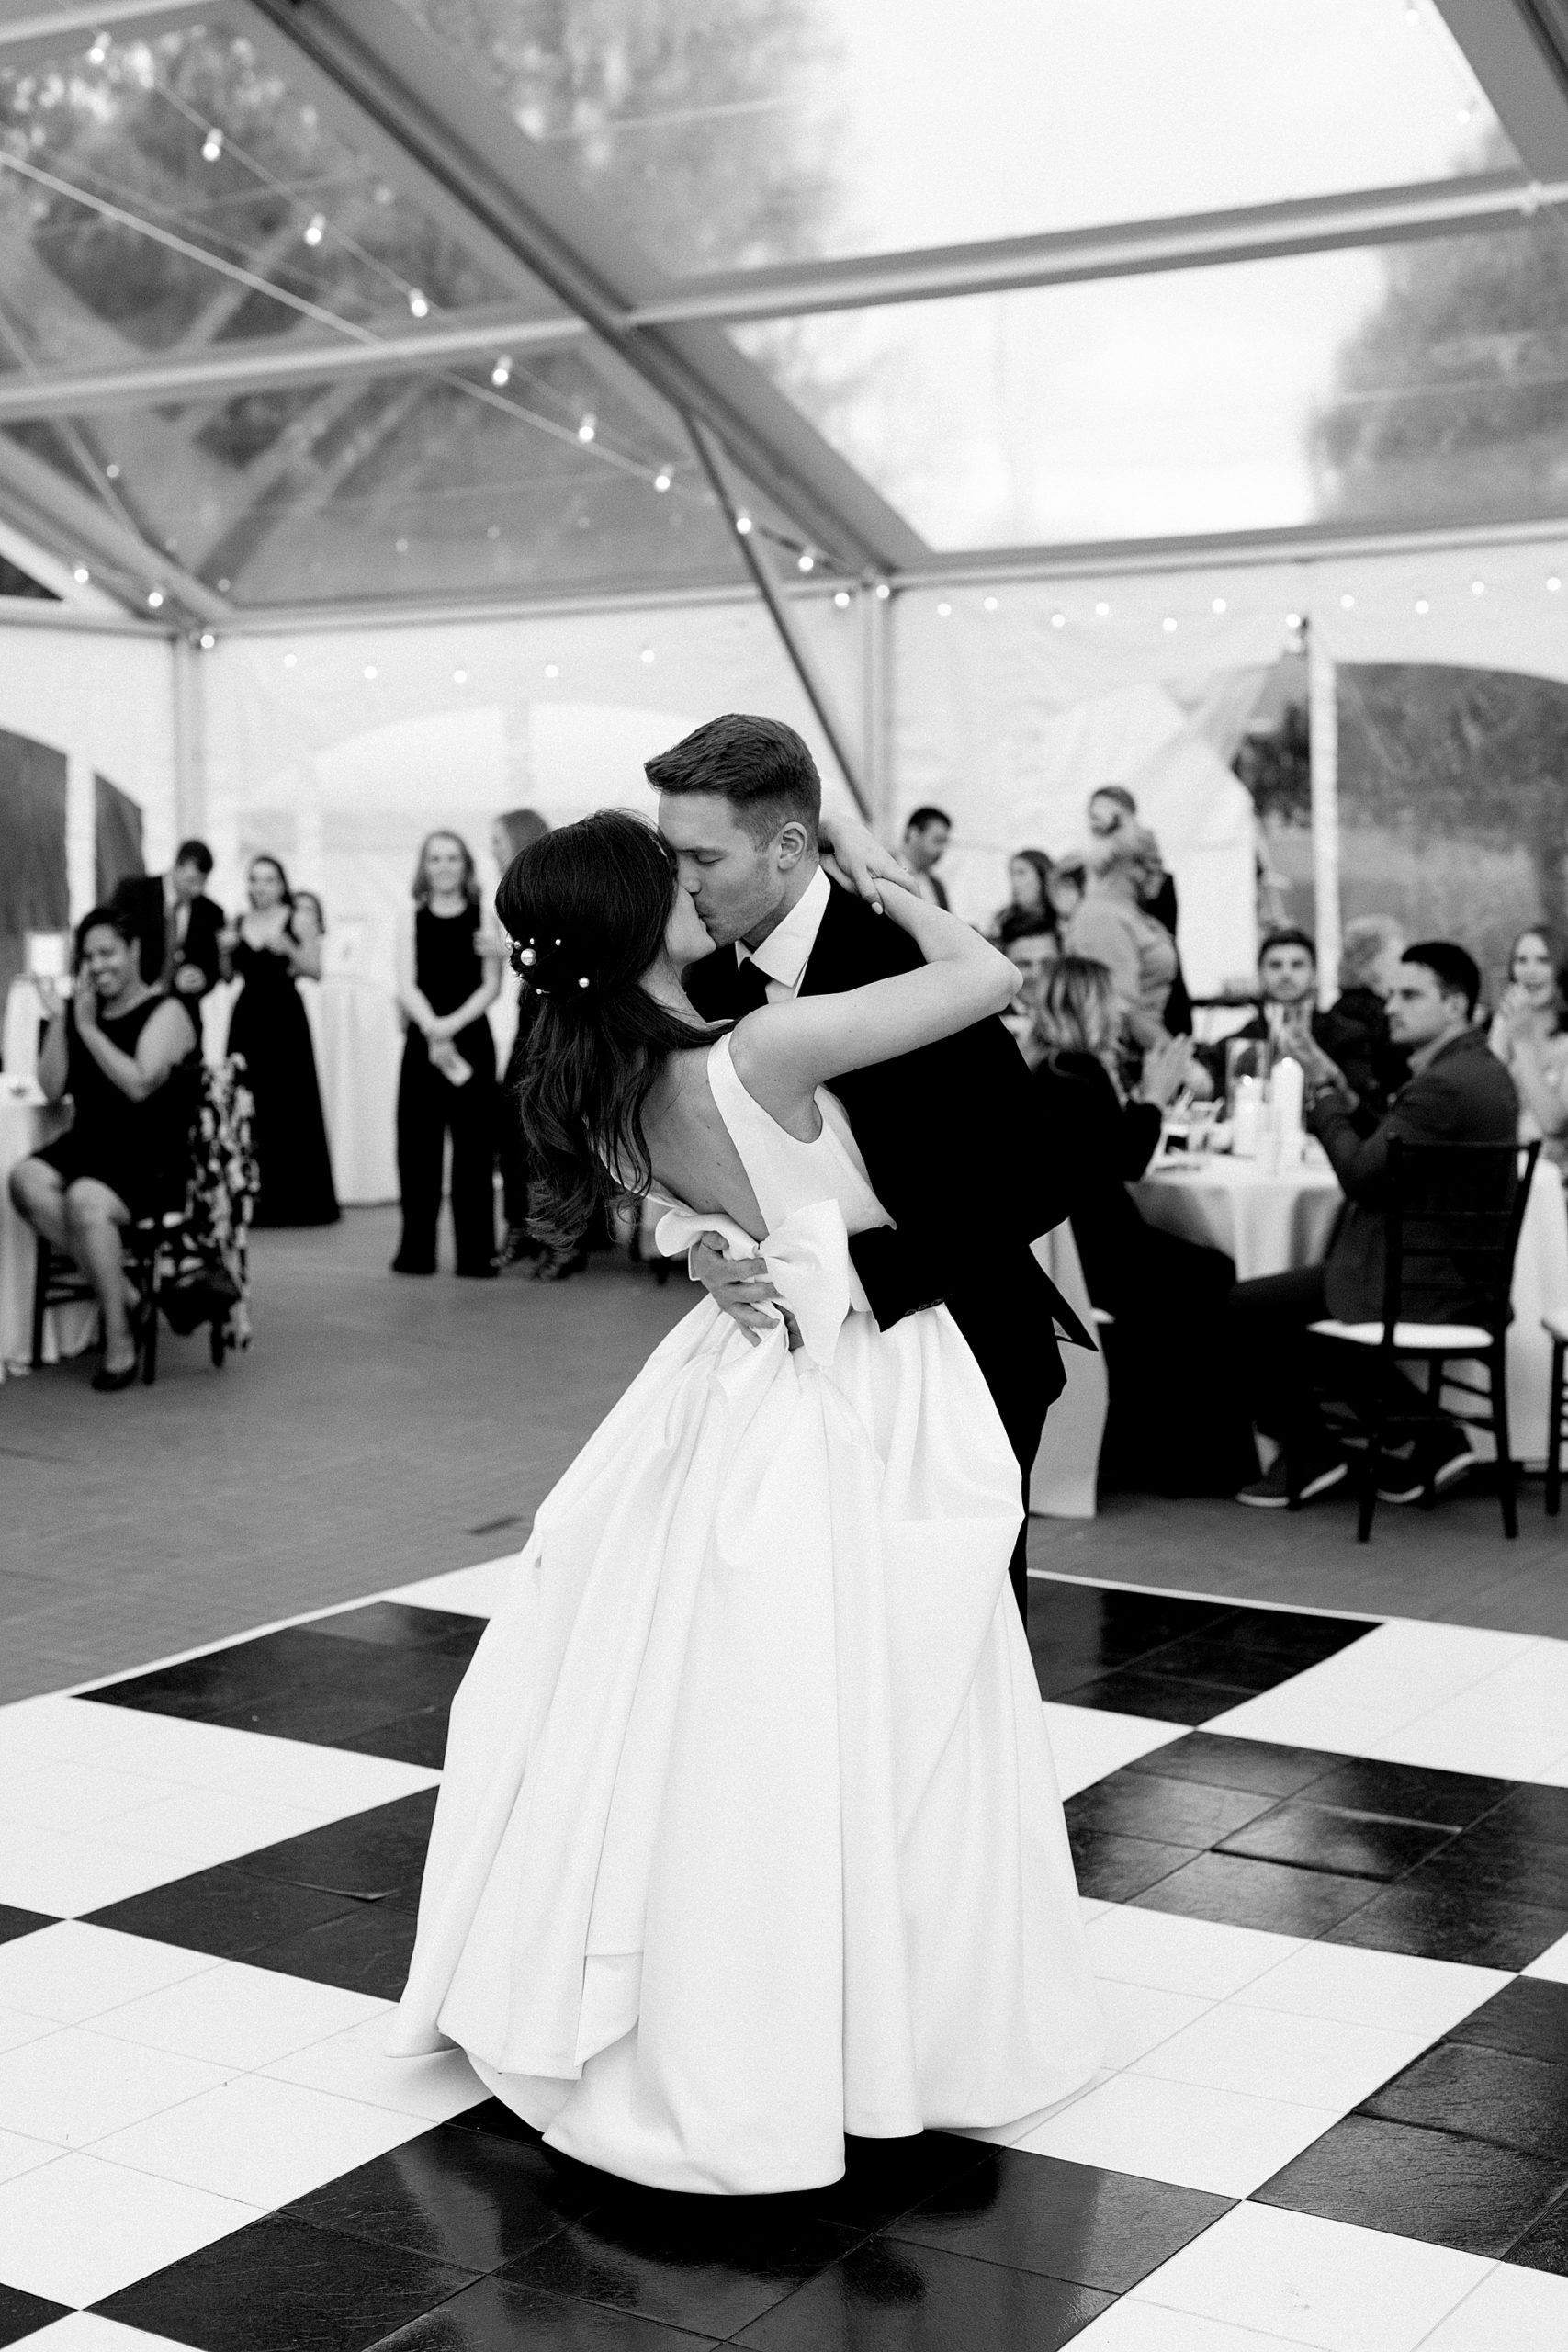 A springtime tented wedding at The Inn at St. John's in metro Detroit by Michigan wedding photographer Breanne Rochelle Photography.